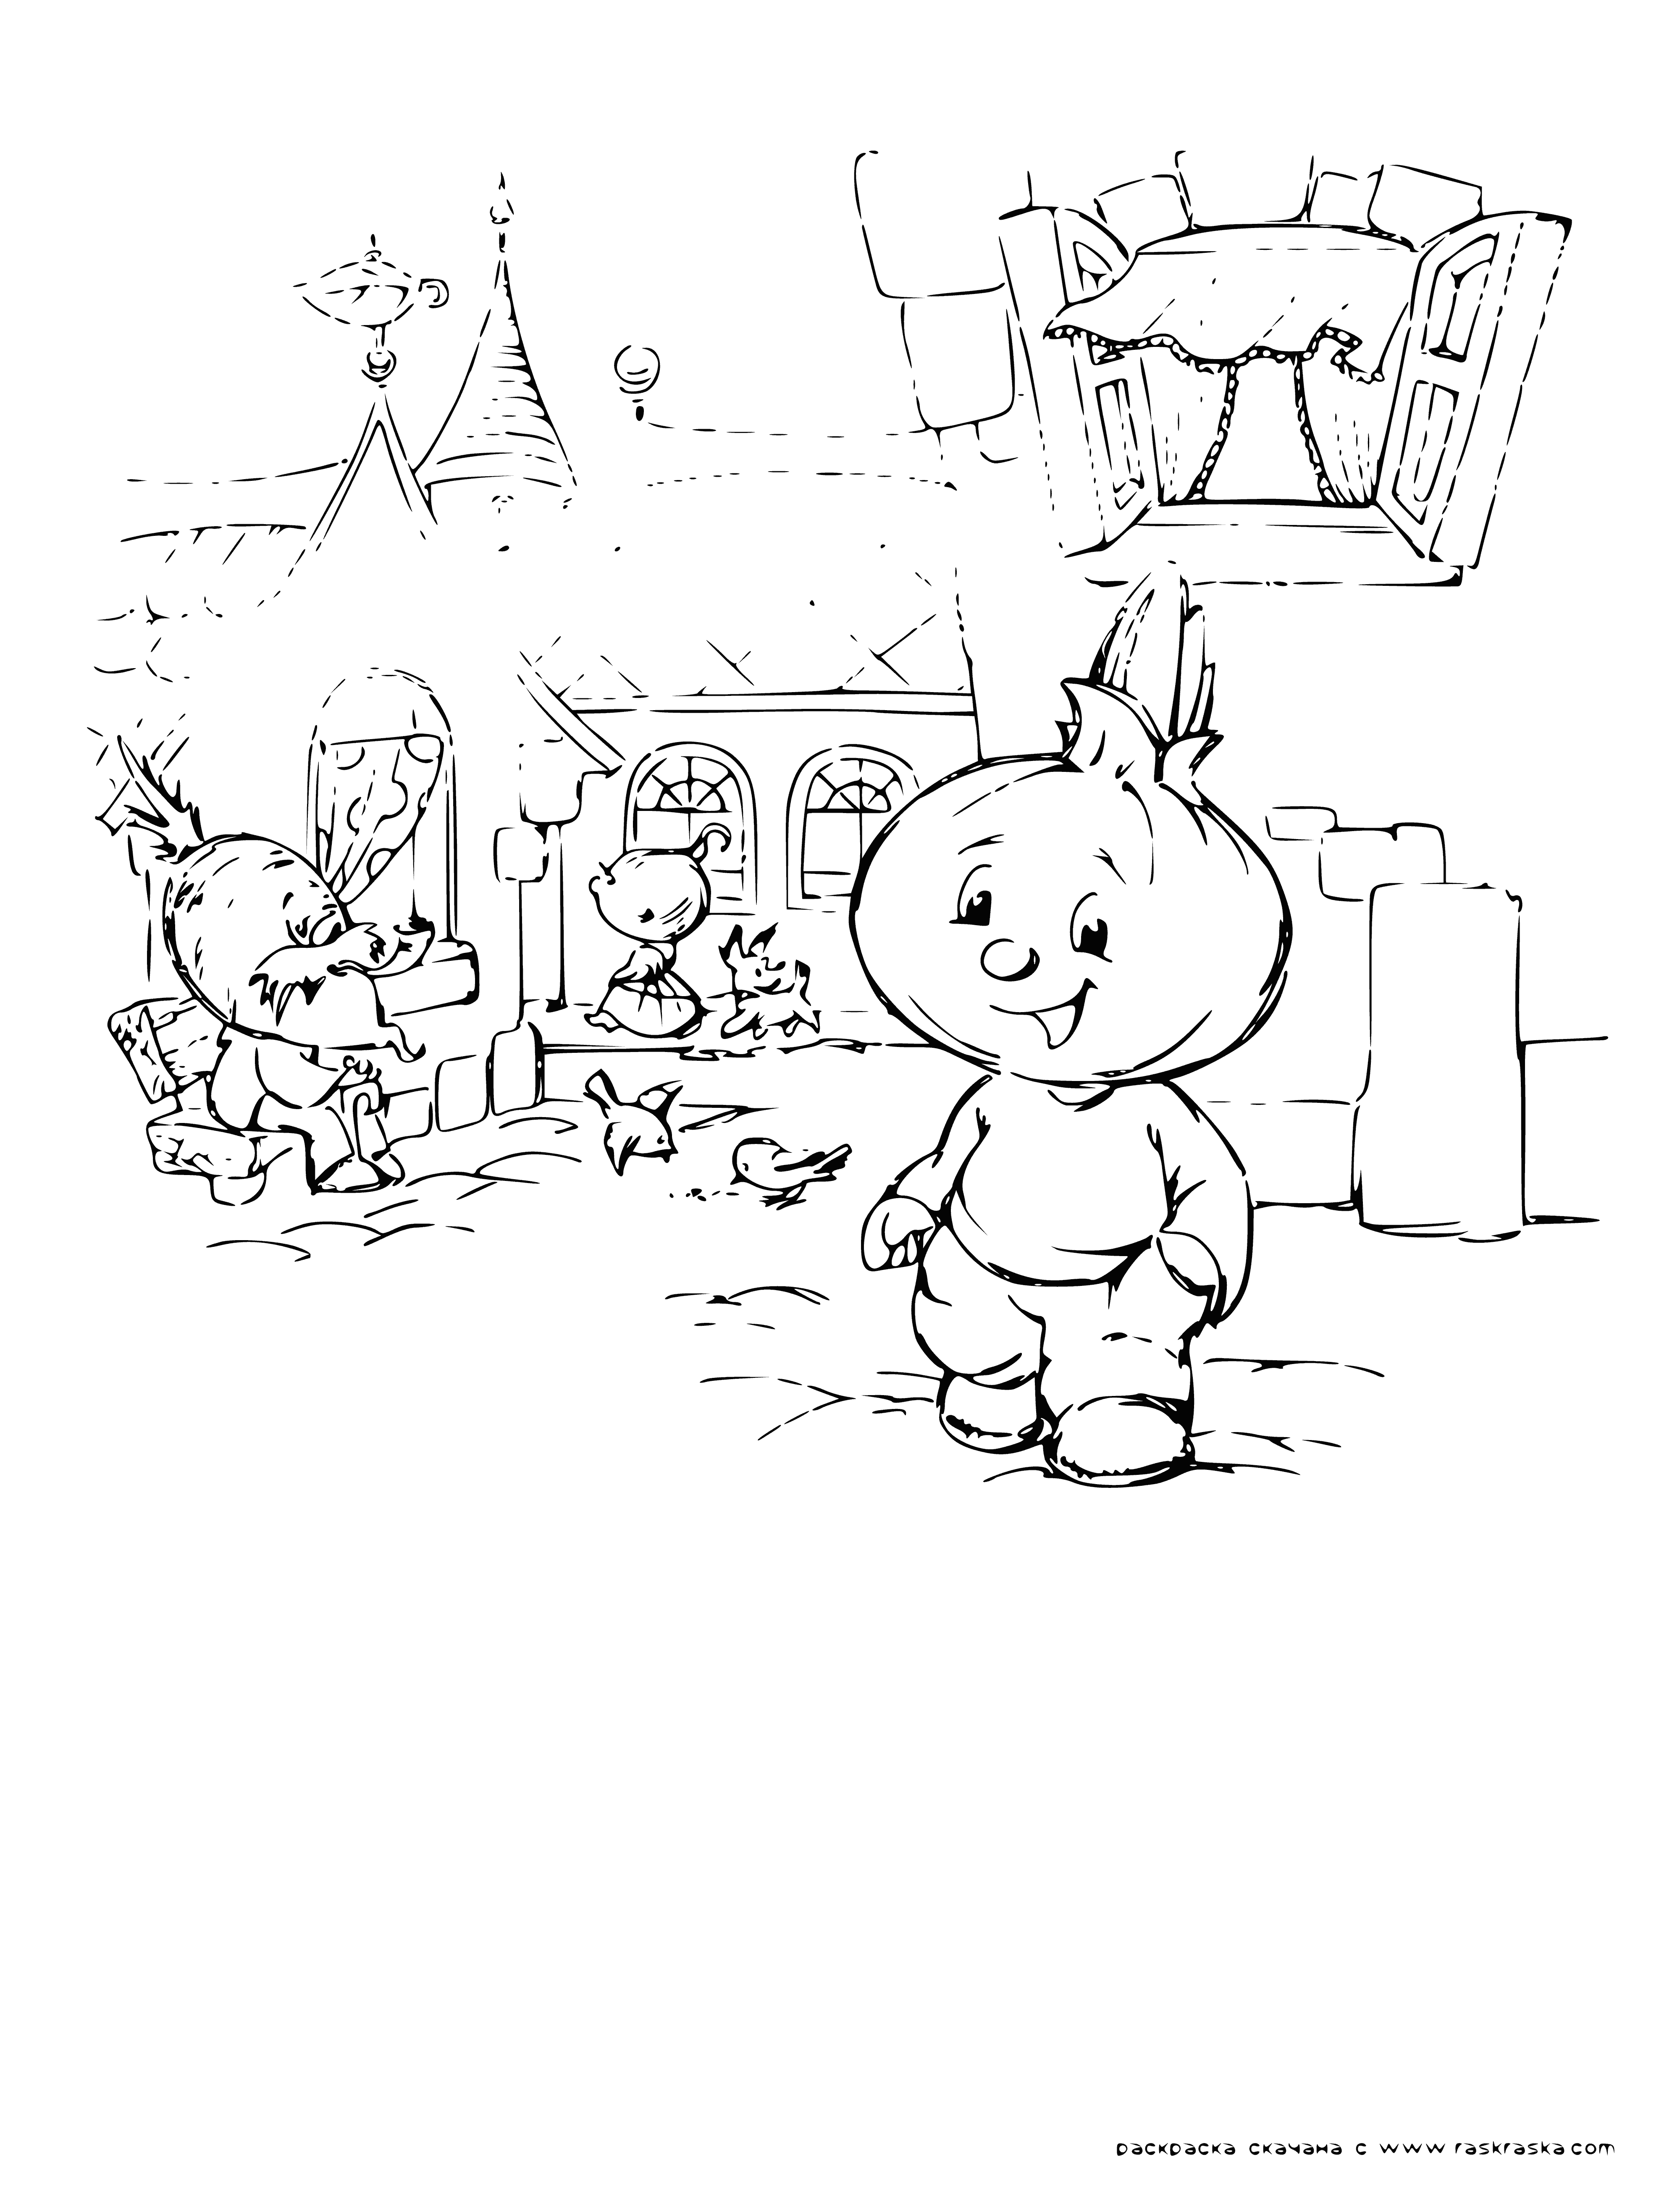 coloring page: Chipollino is born in a land of onions, works in the fields, impresses the King and is banned but manages to use his daring plan to save his father & other workers.